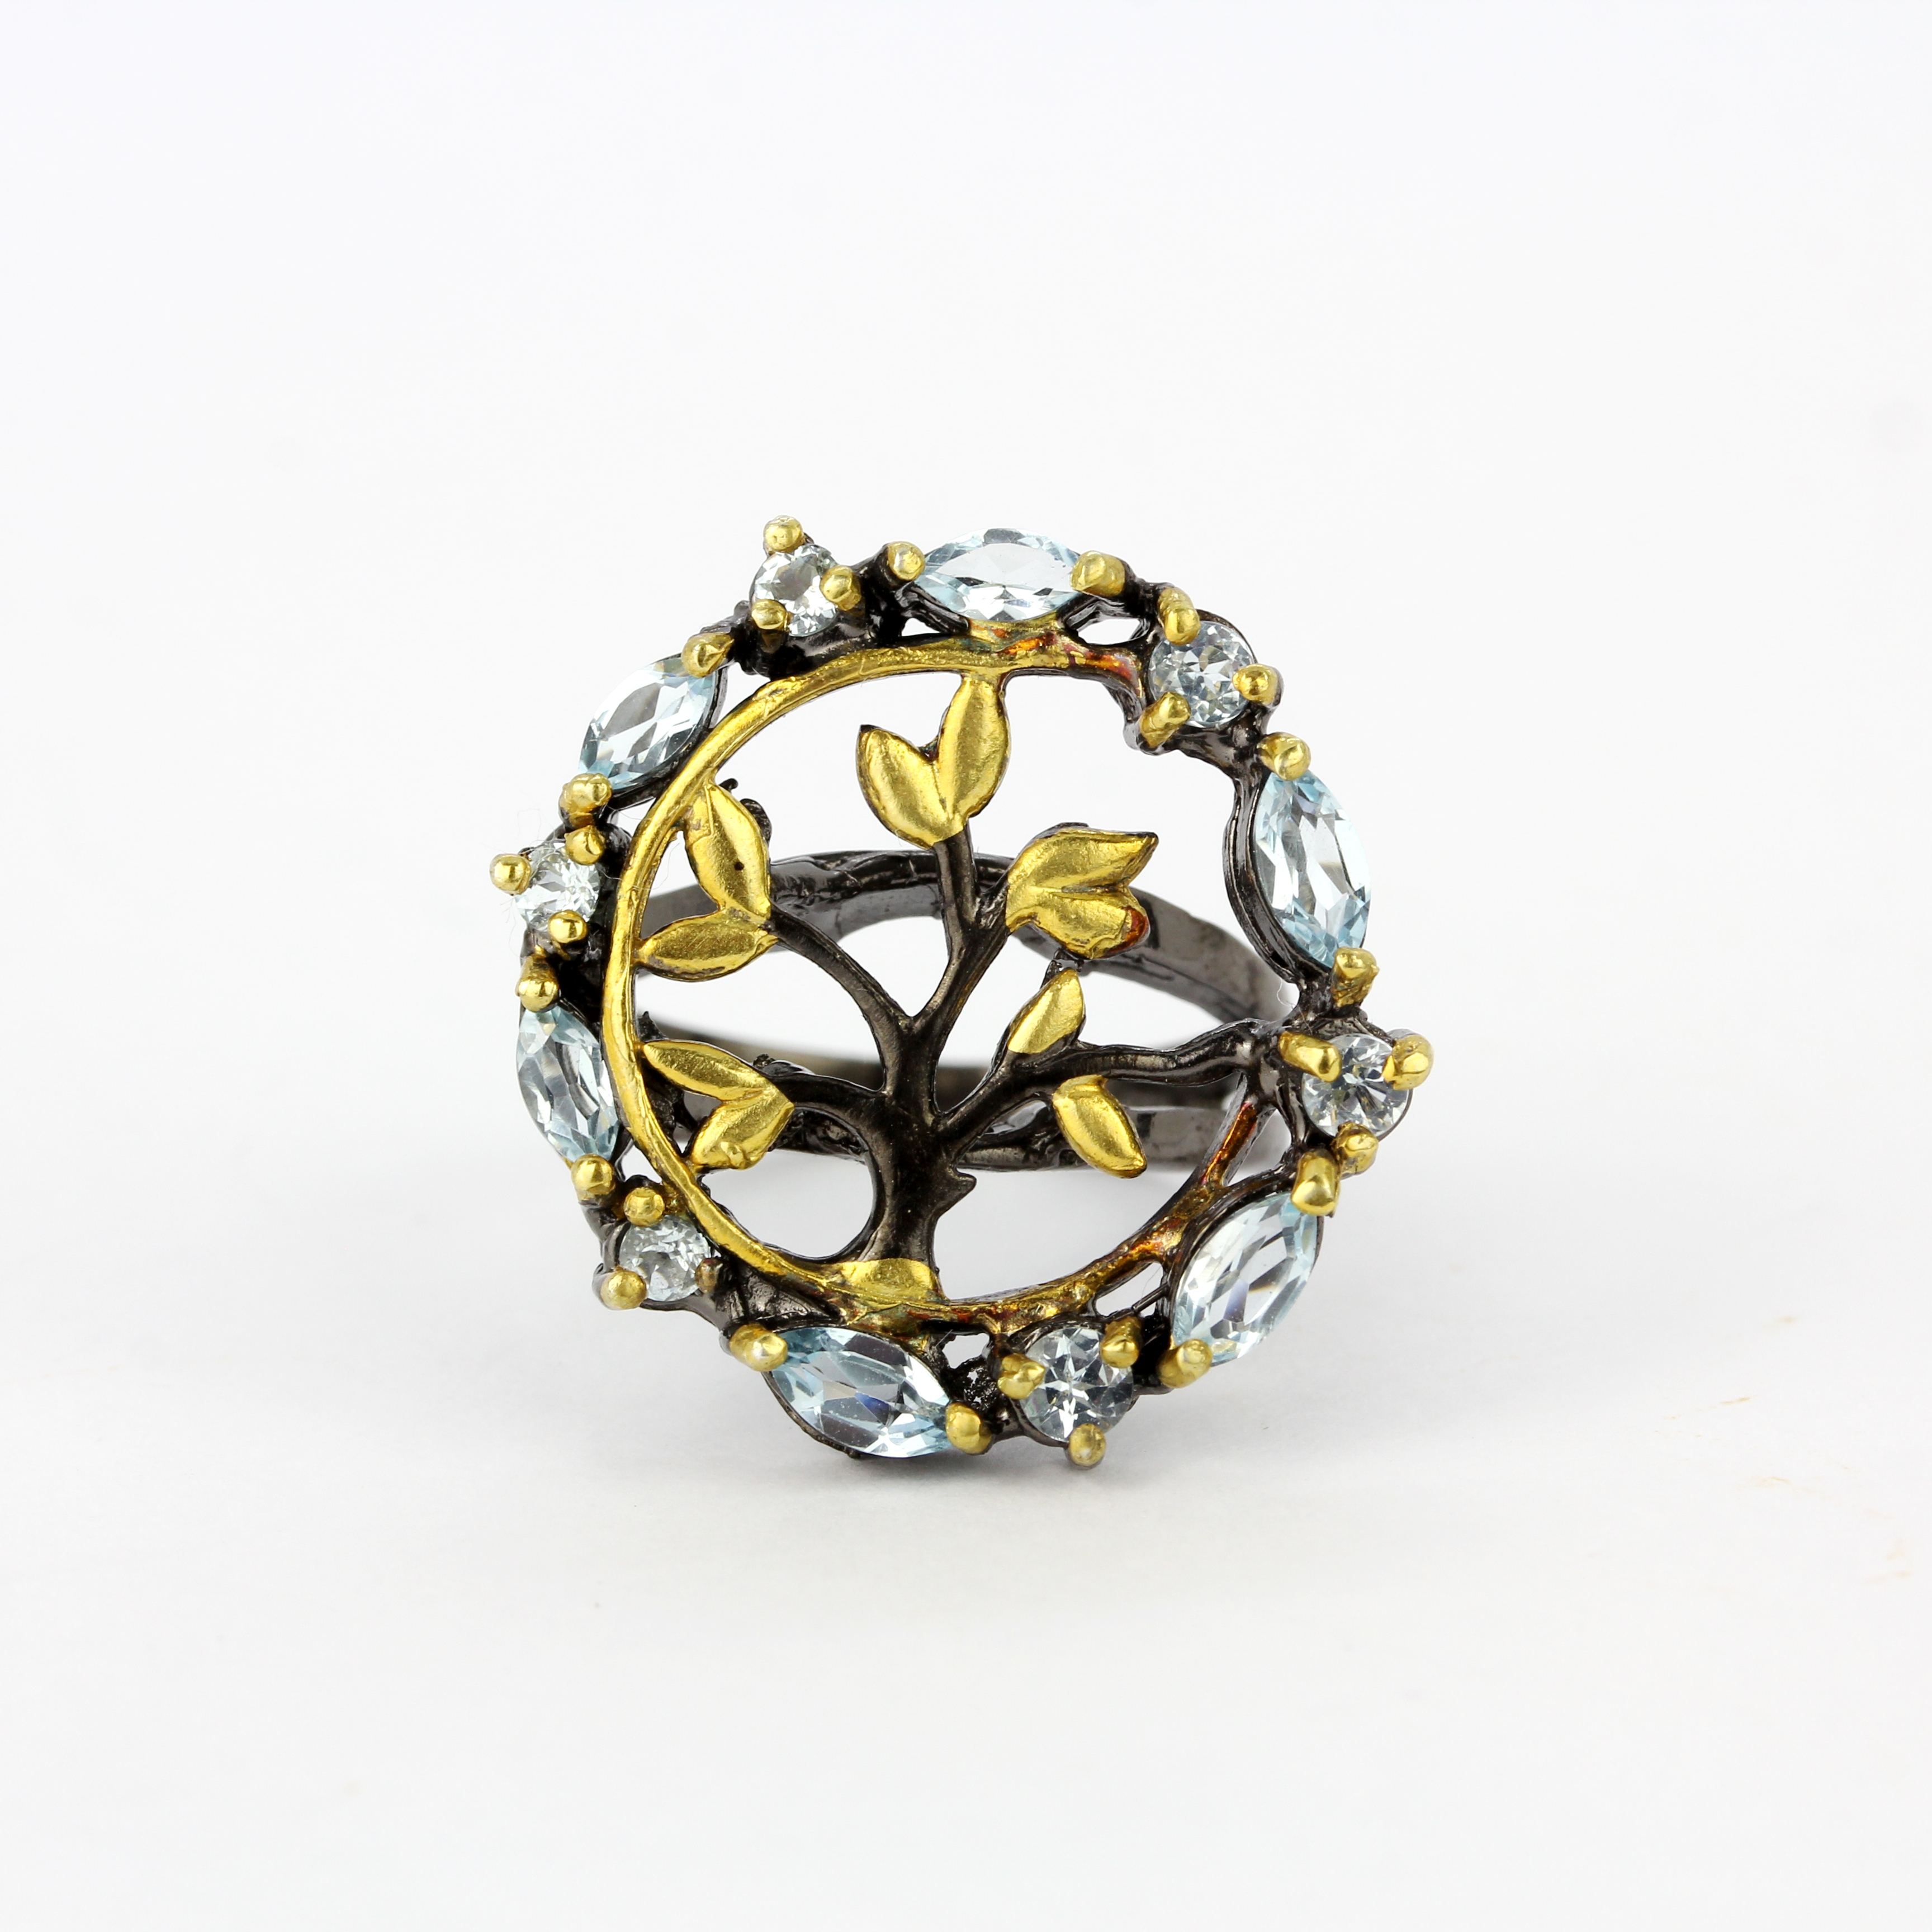 A 925 silver gilt ring set with blue topaz, ring size R.